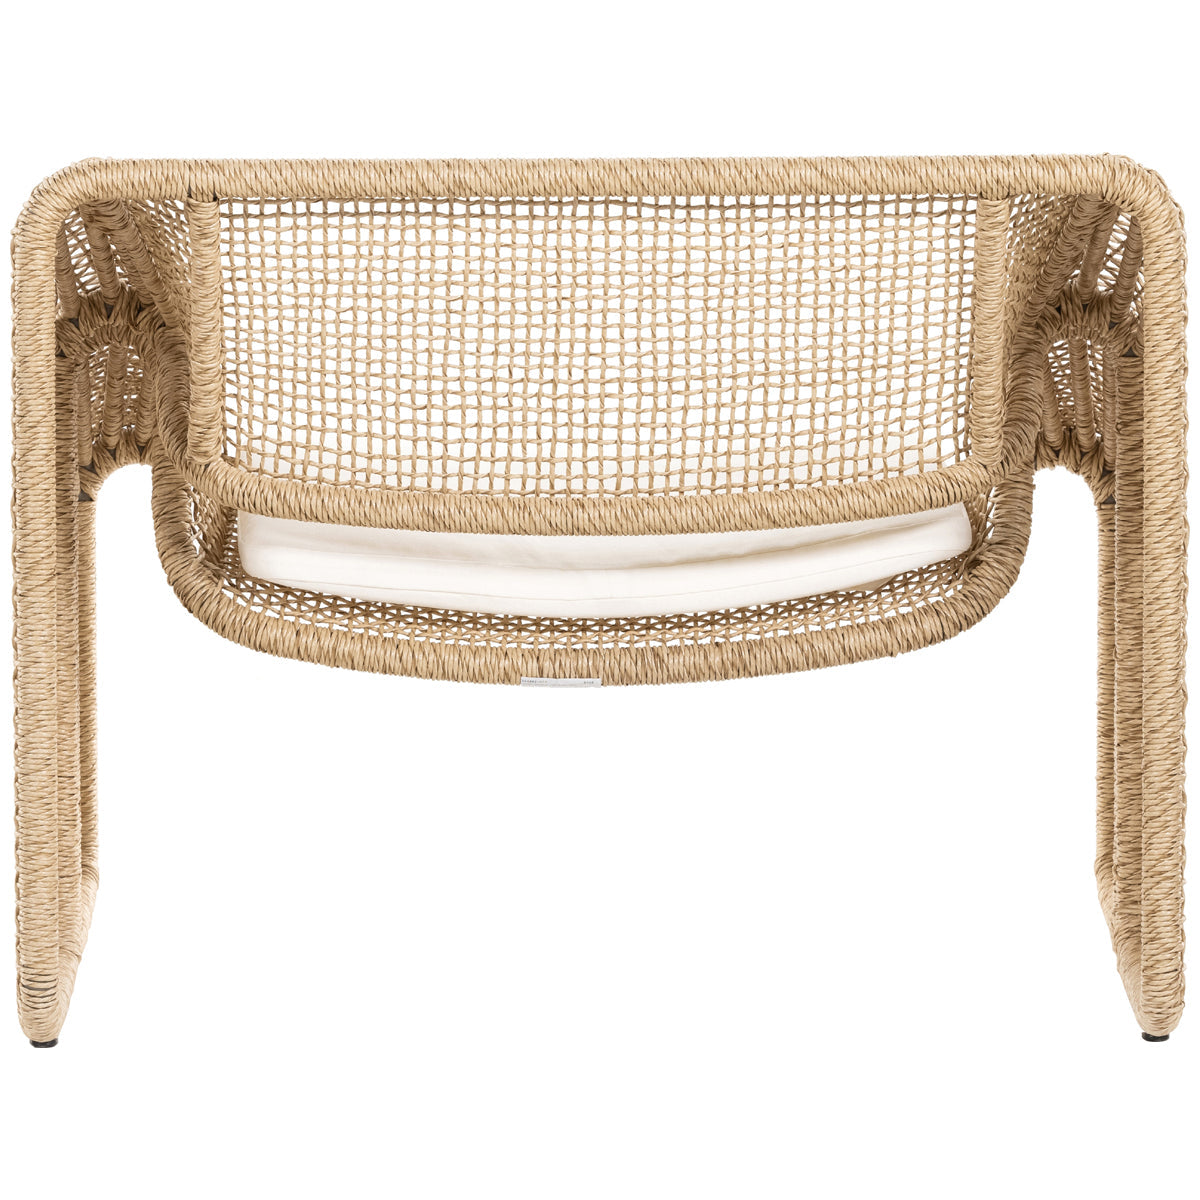 Four Hands Solano Selma Outdoor Chair - Faux Hyacinth